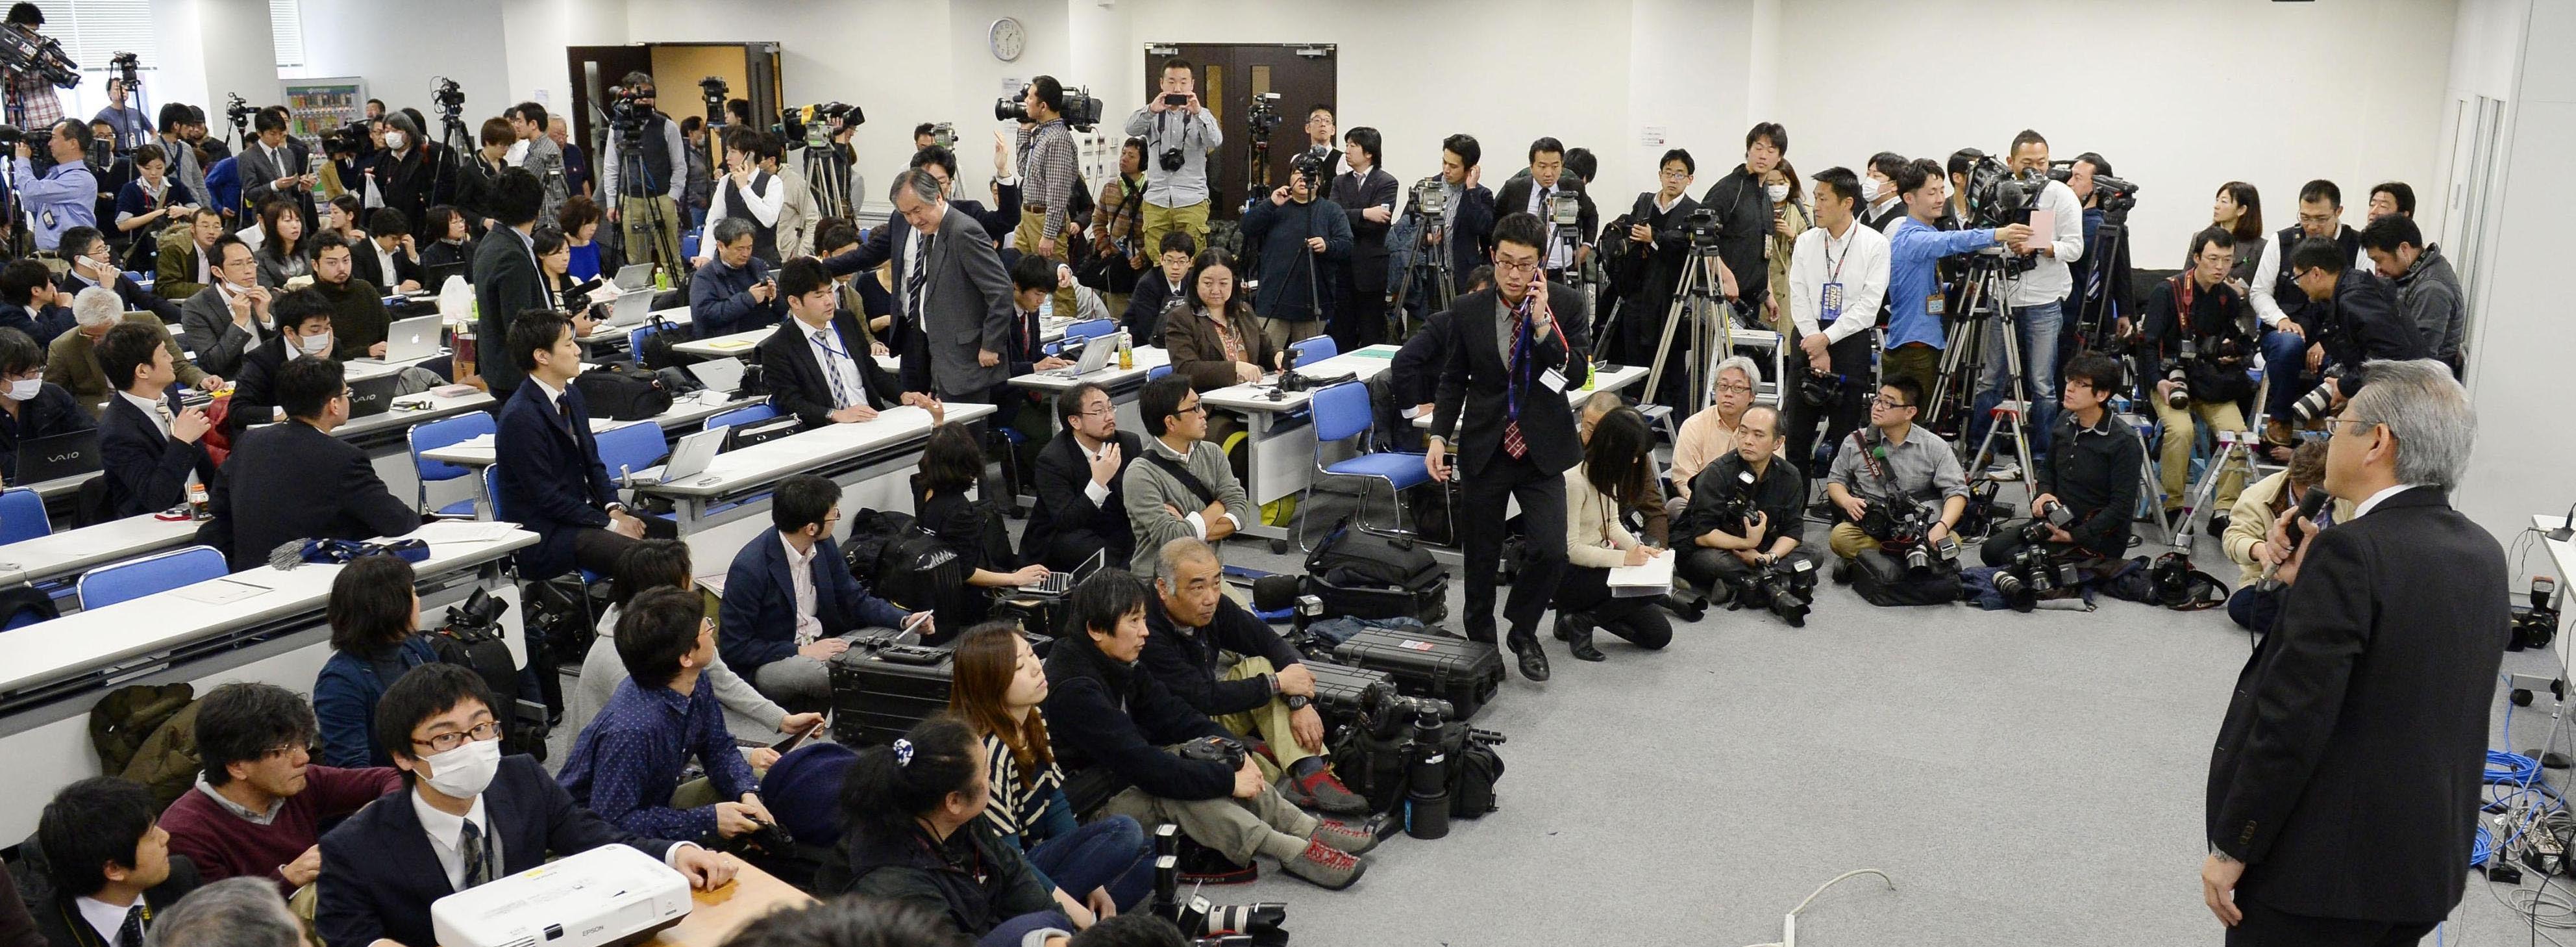 An official of the government-affiliated Riken institute outlines how a highly anticipated news conference would proceed Friday in Tokyo before Riken executives released an interim report on an investigation into alleged irregularities in papers on potentially groundbreaking stem cell research. | KYODO